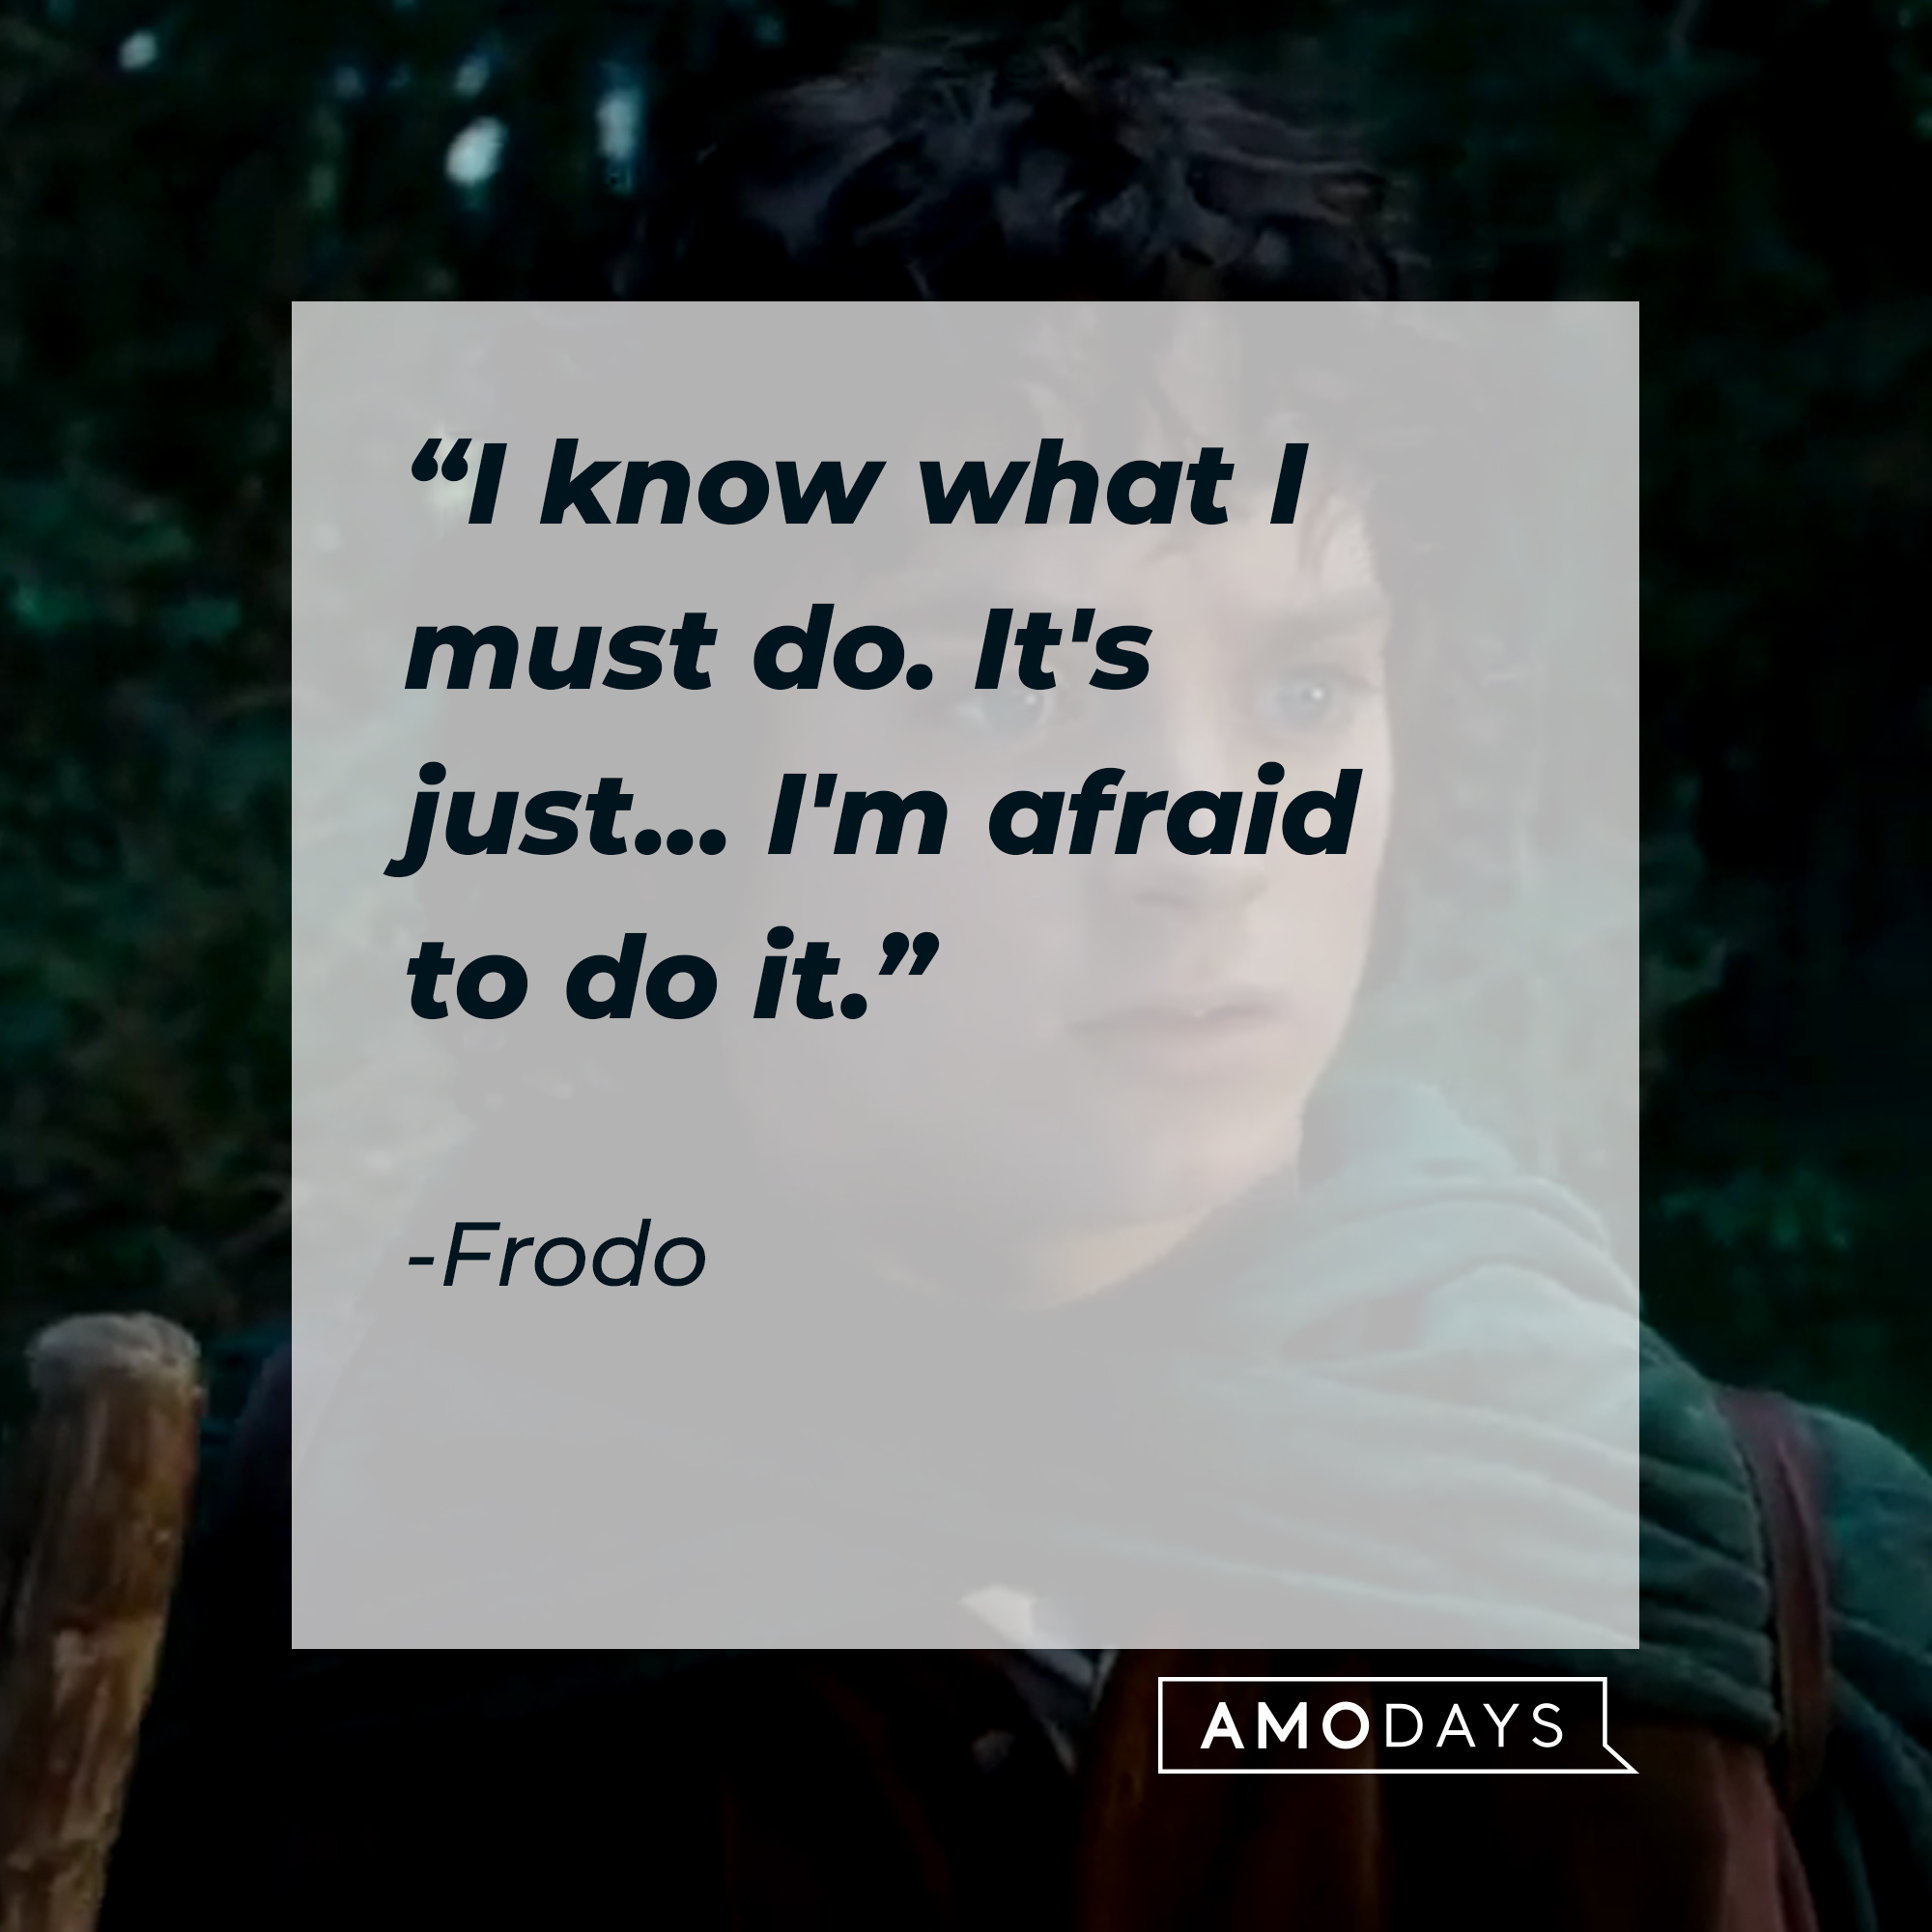 A photo of Frodo Baggins with the quote, "I know what I must do. It's just... I'm afraid to do it." | Source: Facebook/lordoftheringstrilogy